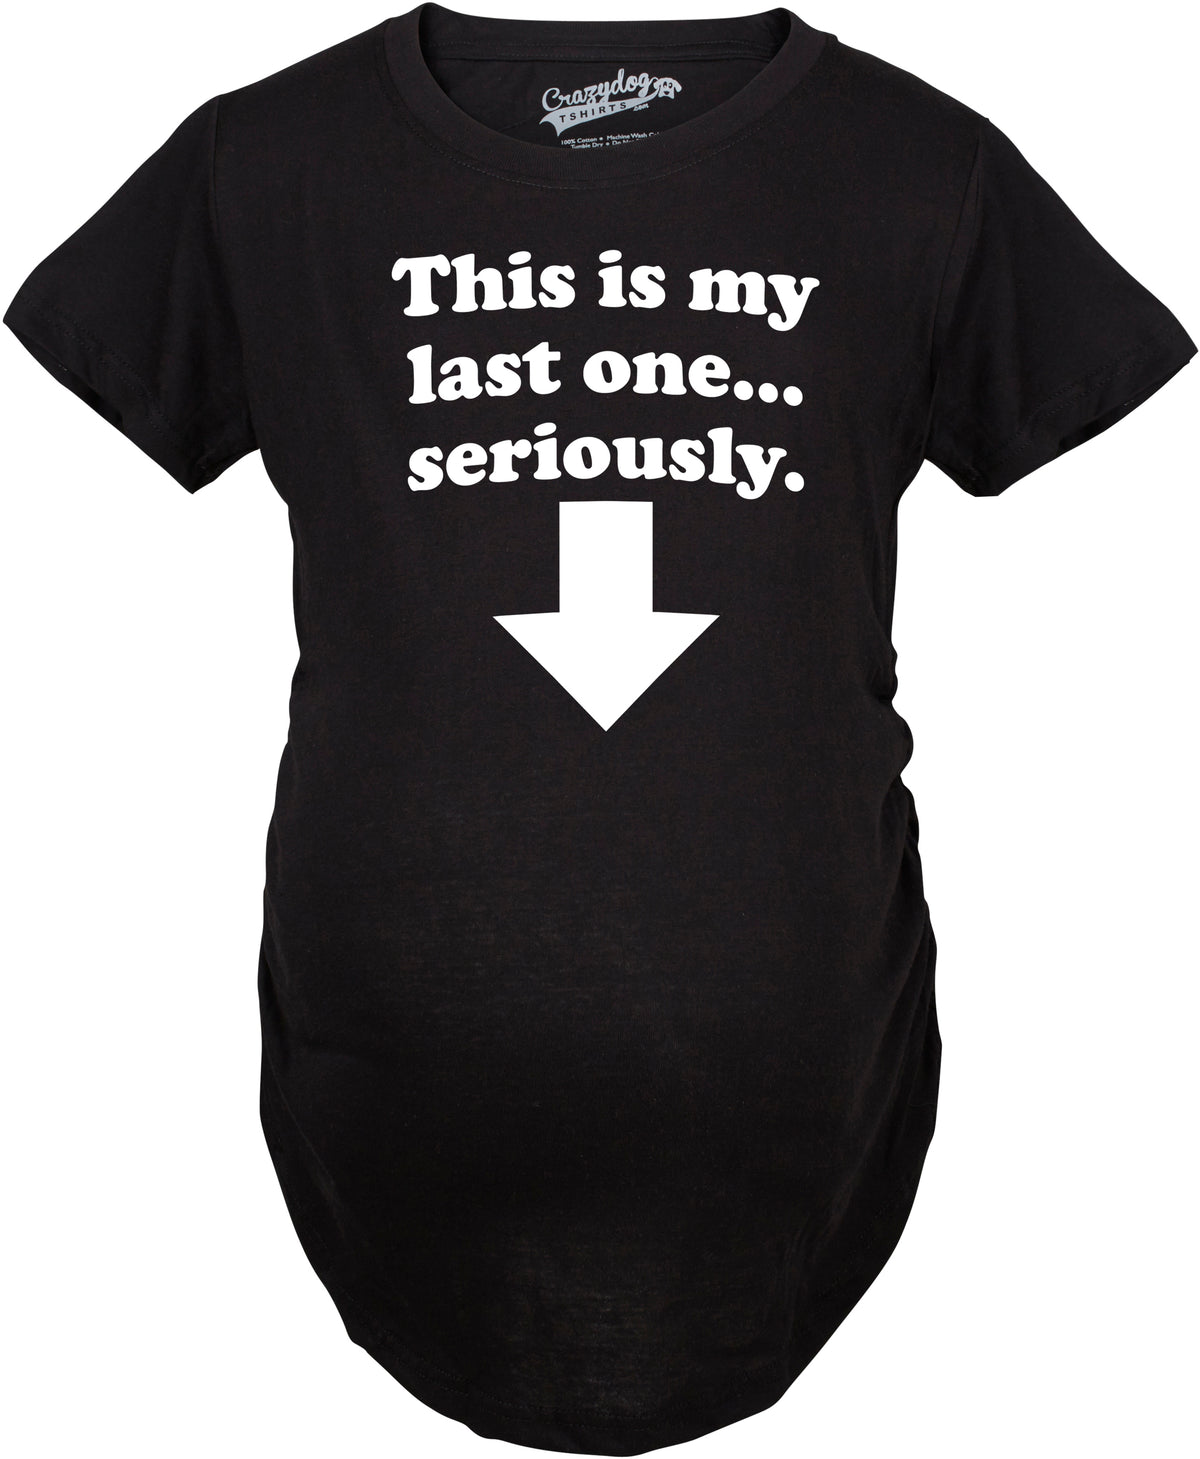 Funny Black - Last One This Is My Last One Seriously Maternity T Shirt Nerdy Sarcastic Tee